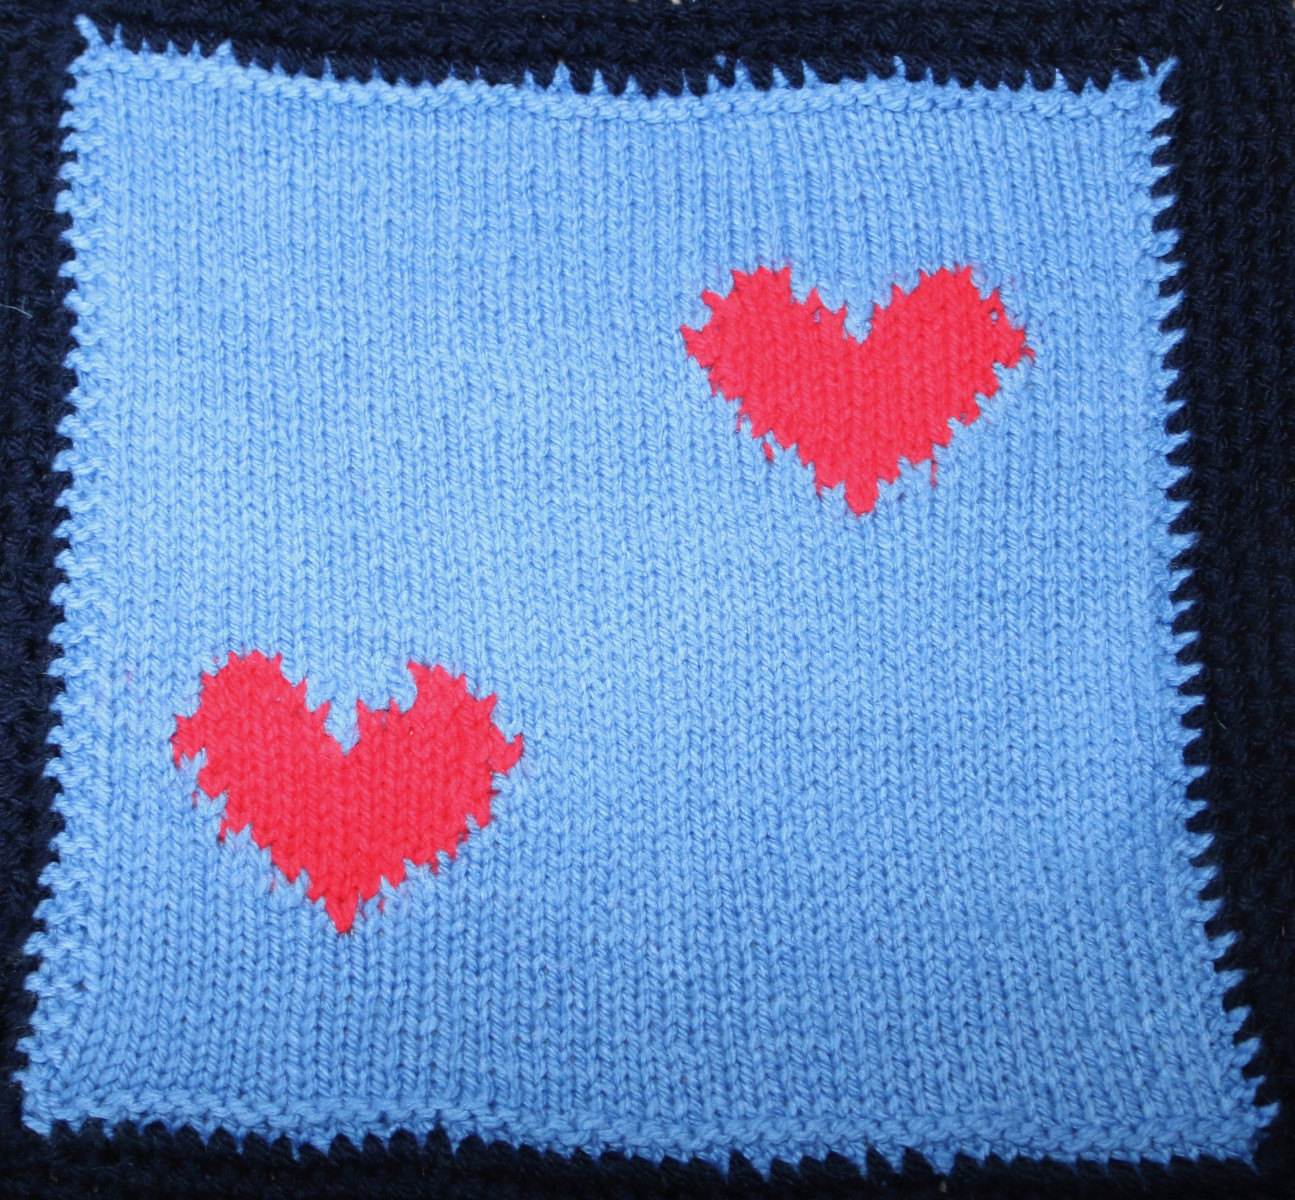 Knitted square: 2 red hearts on a pale blue background